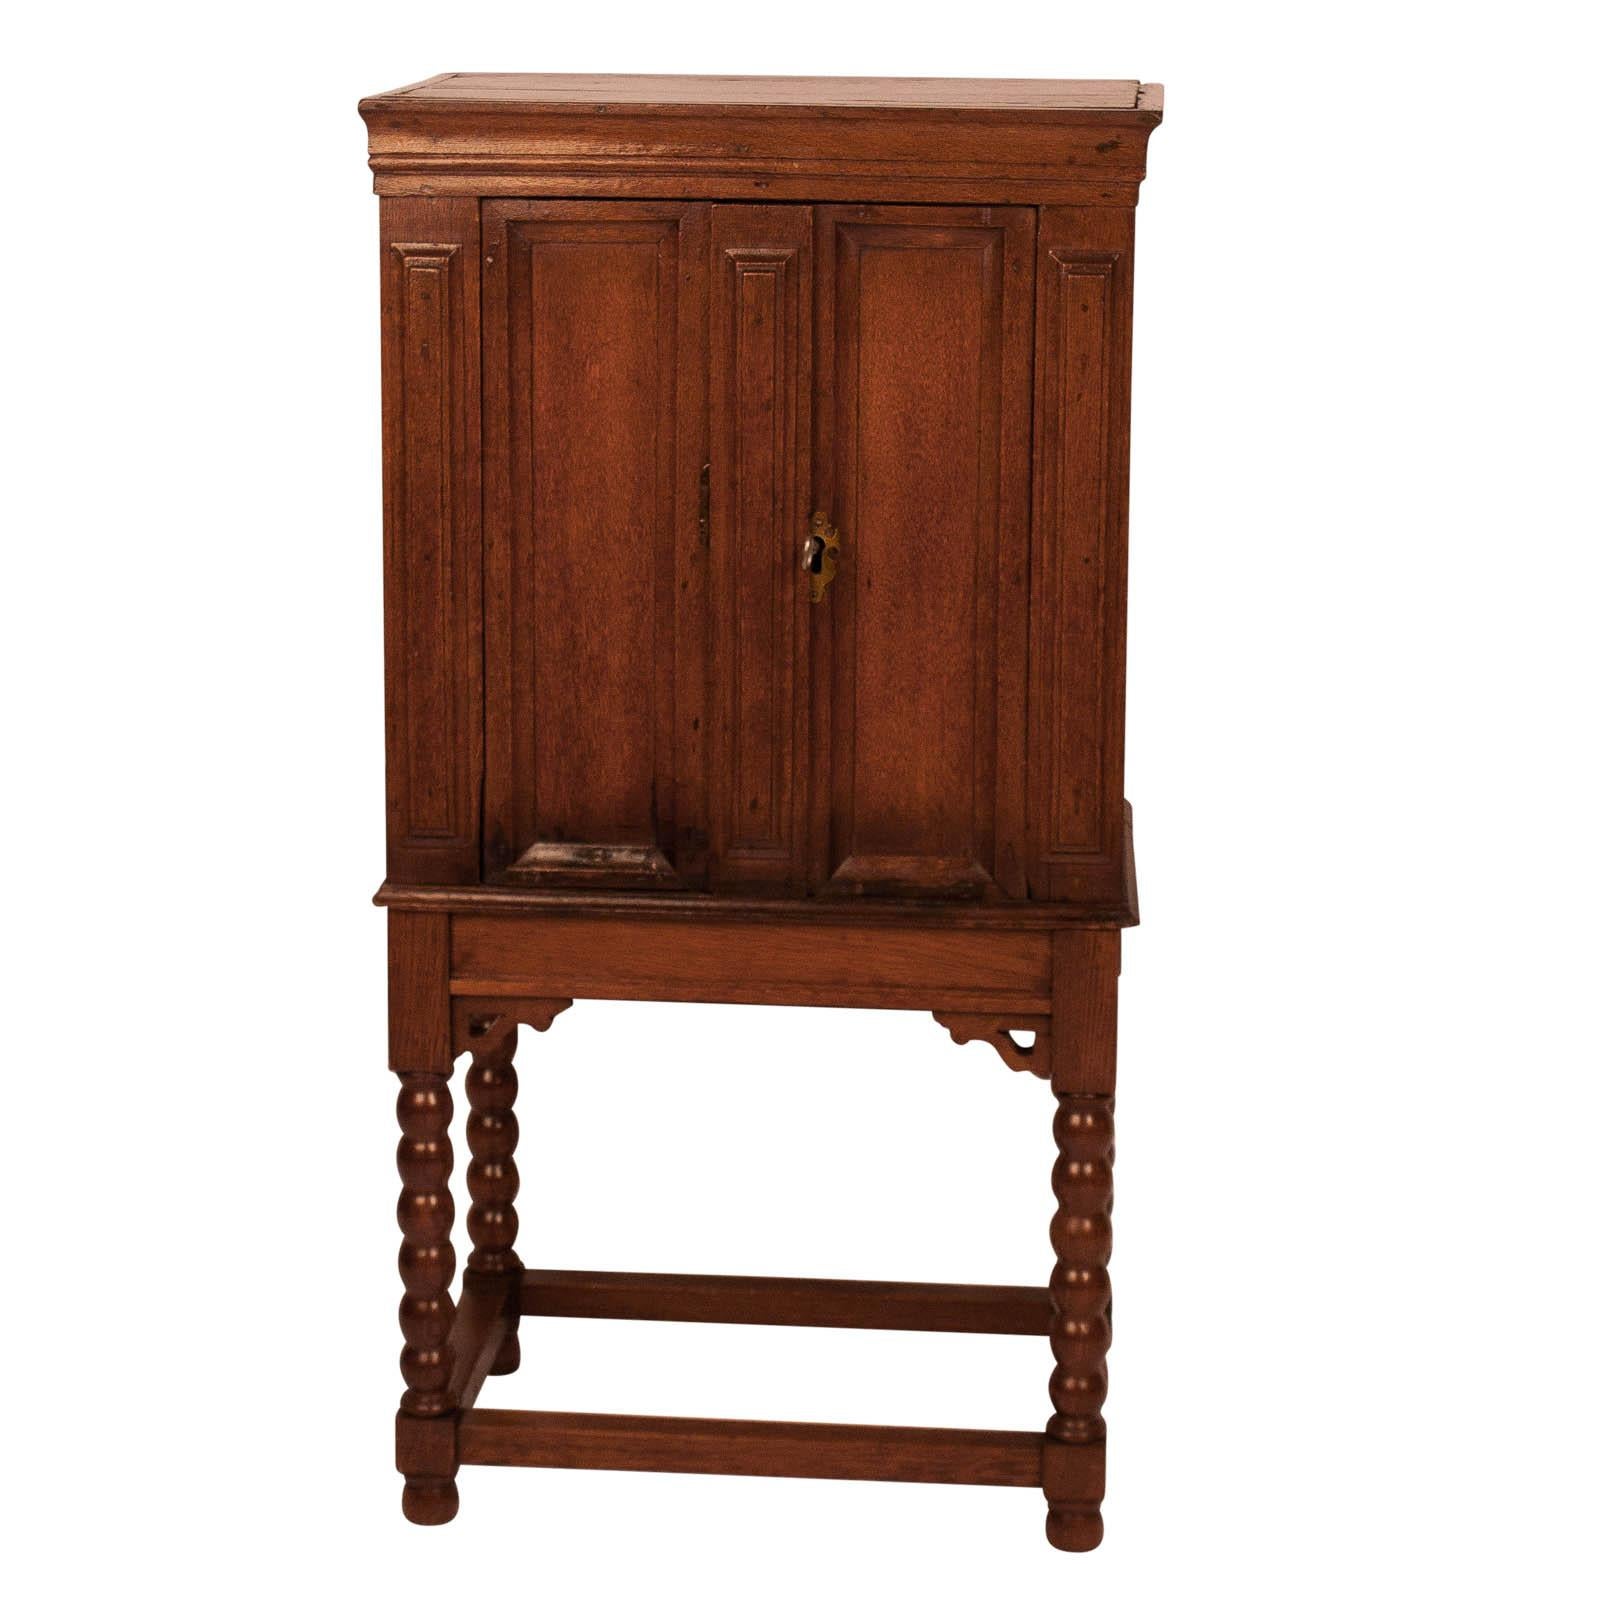 An early 19th century French Baroque ash or elm cabinet on later matching stand, France, circa 1800.

